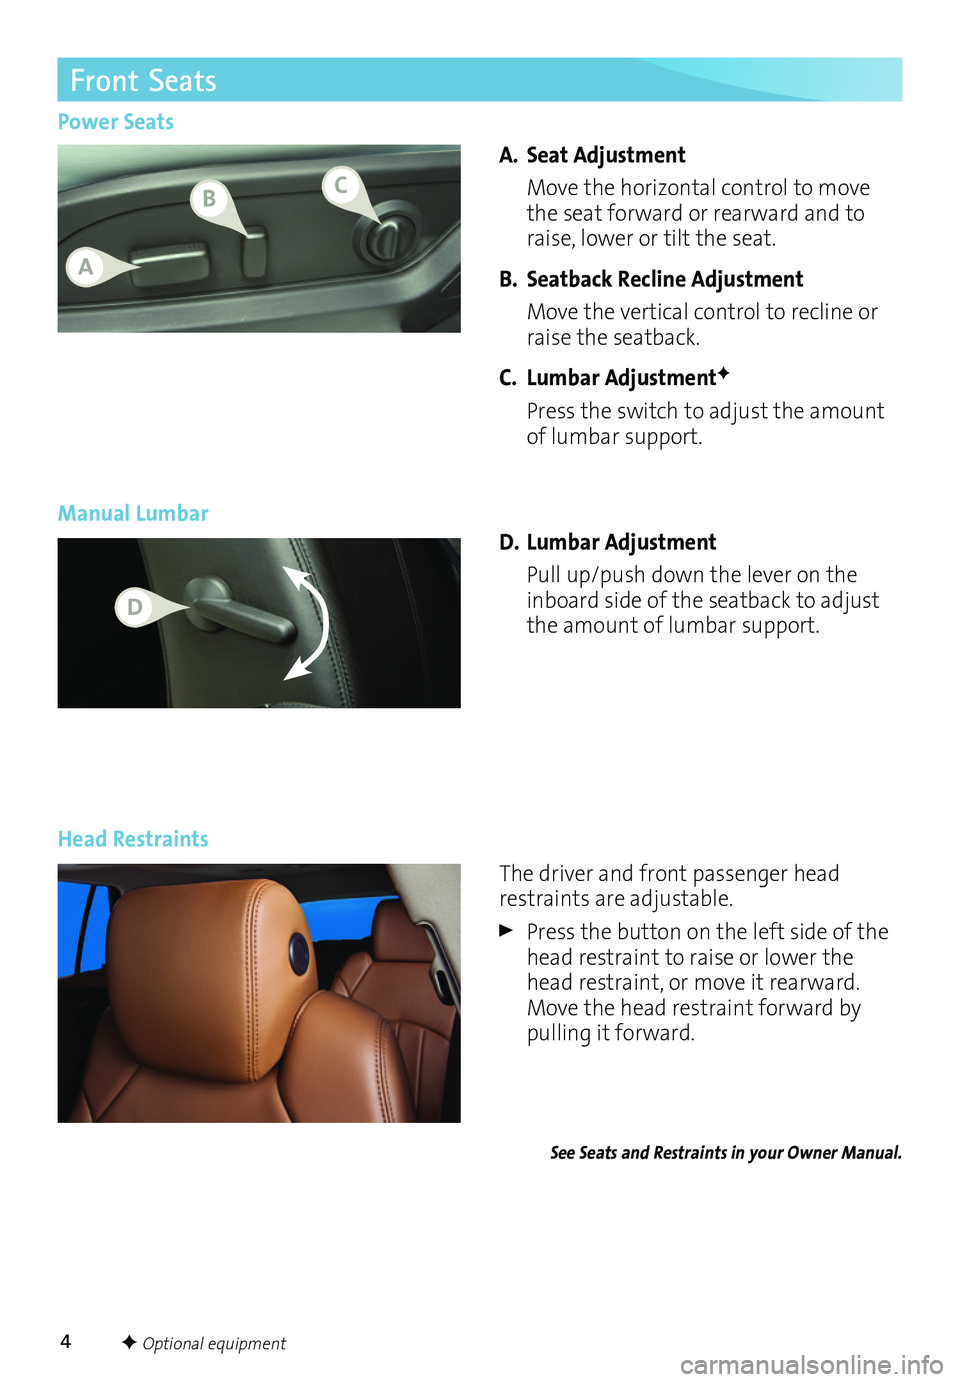 BUICK ENCLAVE 2017  Get To Know Guide 4
Front Seats 
A. Seat Adjustment
 Move the horizontal control to move the seat forward or rearward and to raise, lower or tilt the seat.
B. Seatback Recline Adjustment 
 Move the vertical control to 